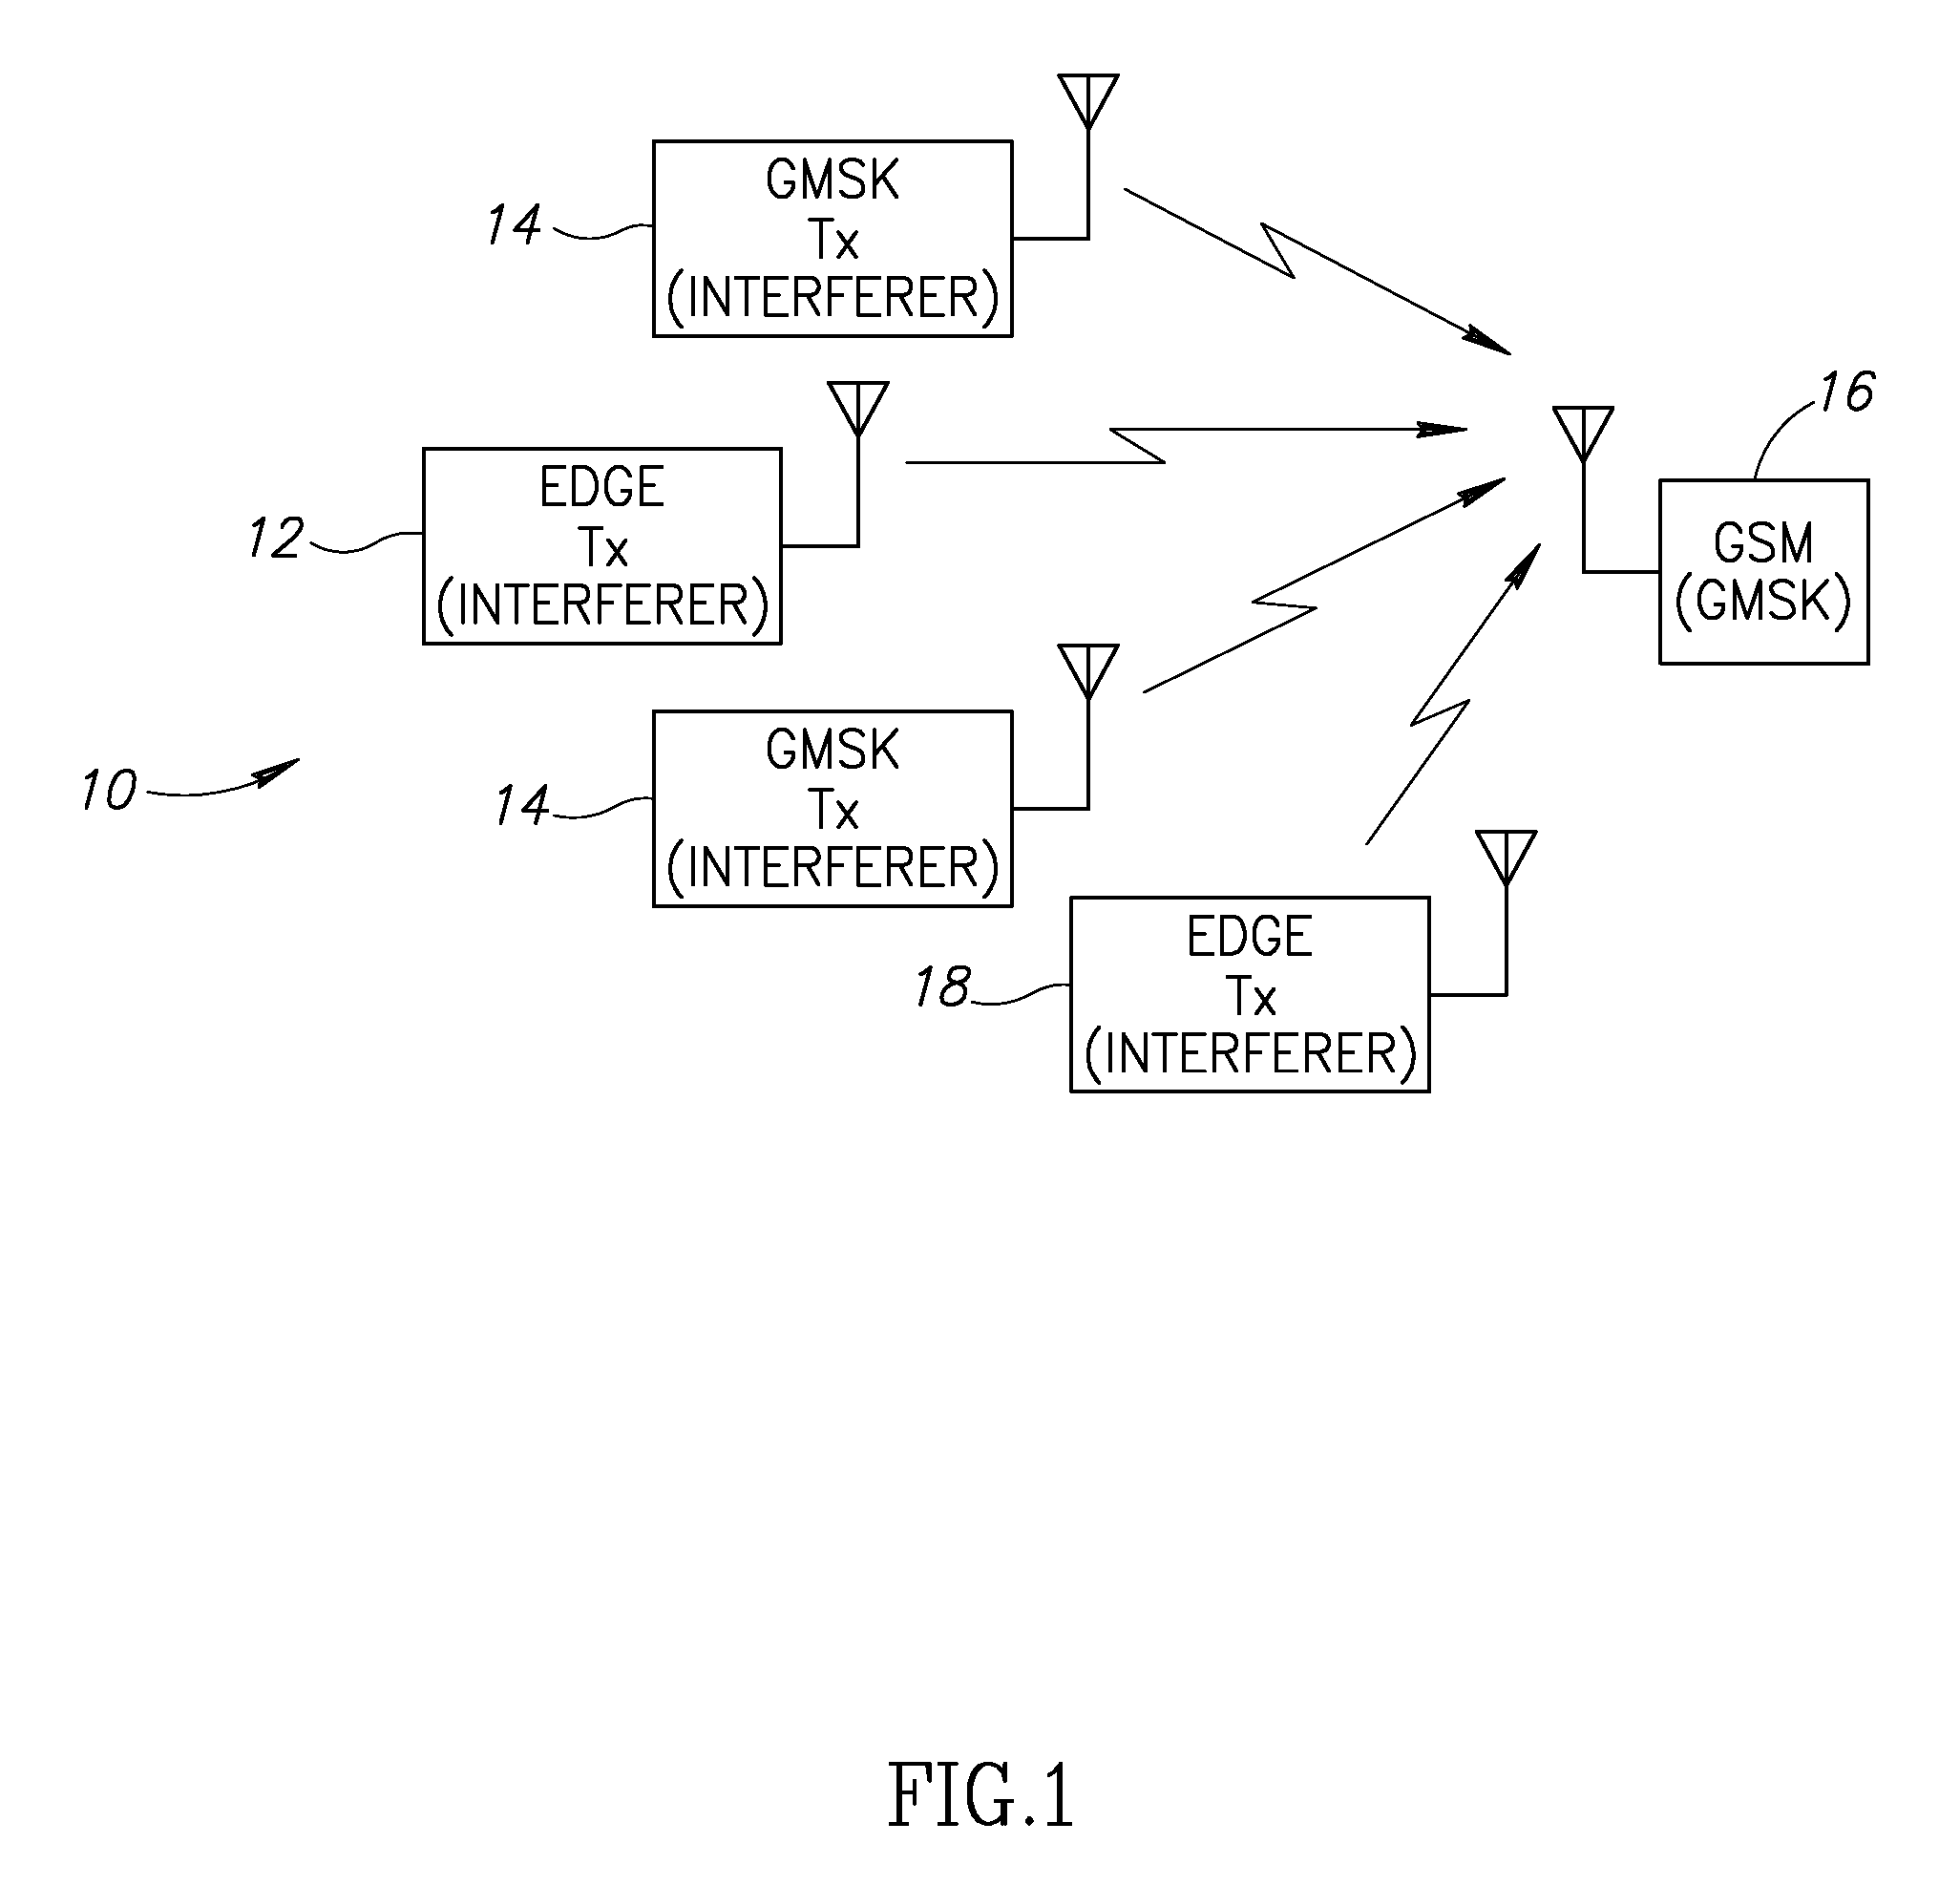 Blind interference mitigation in a digital receiver